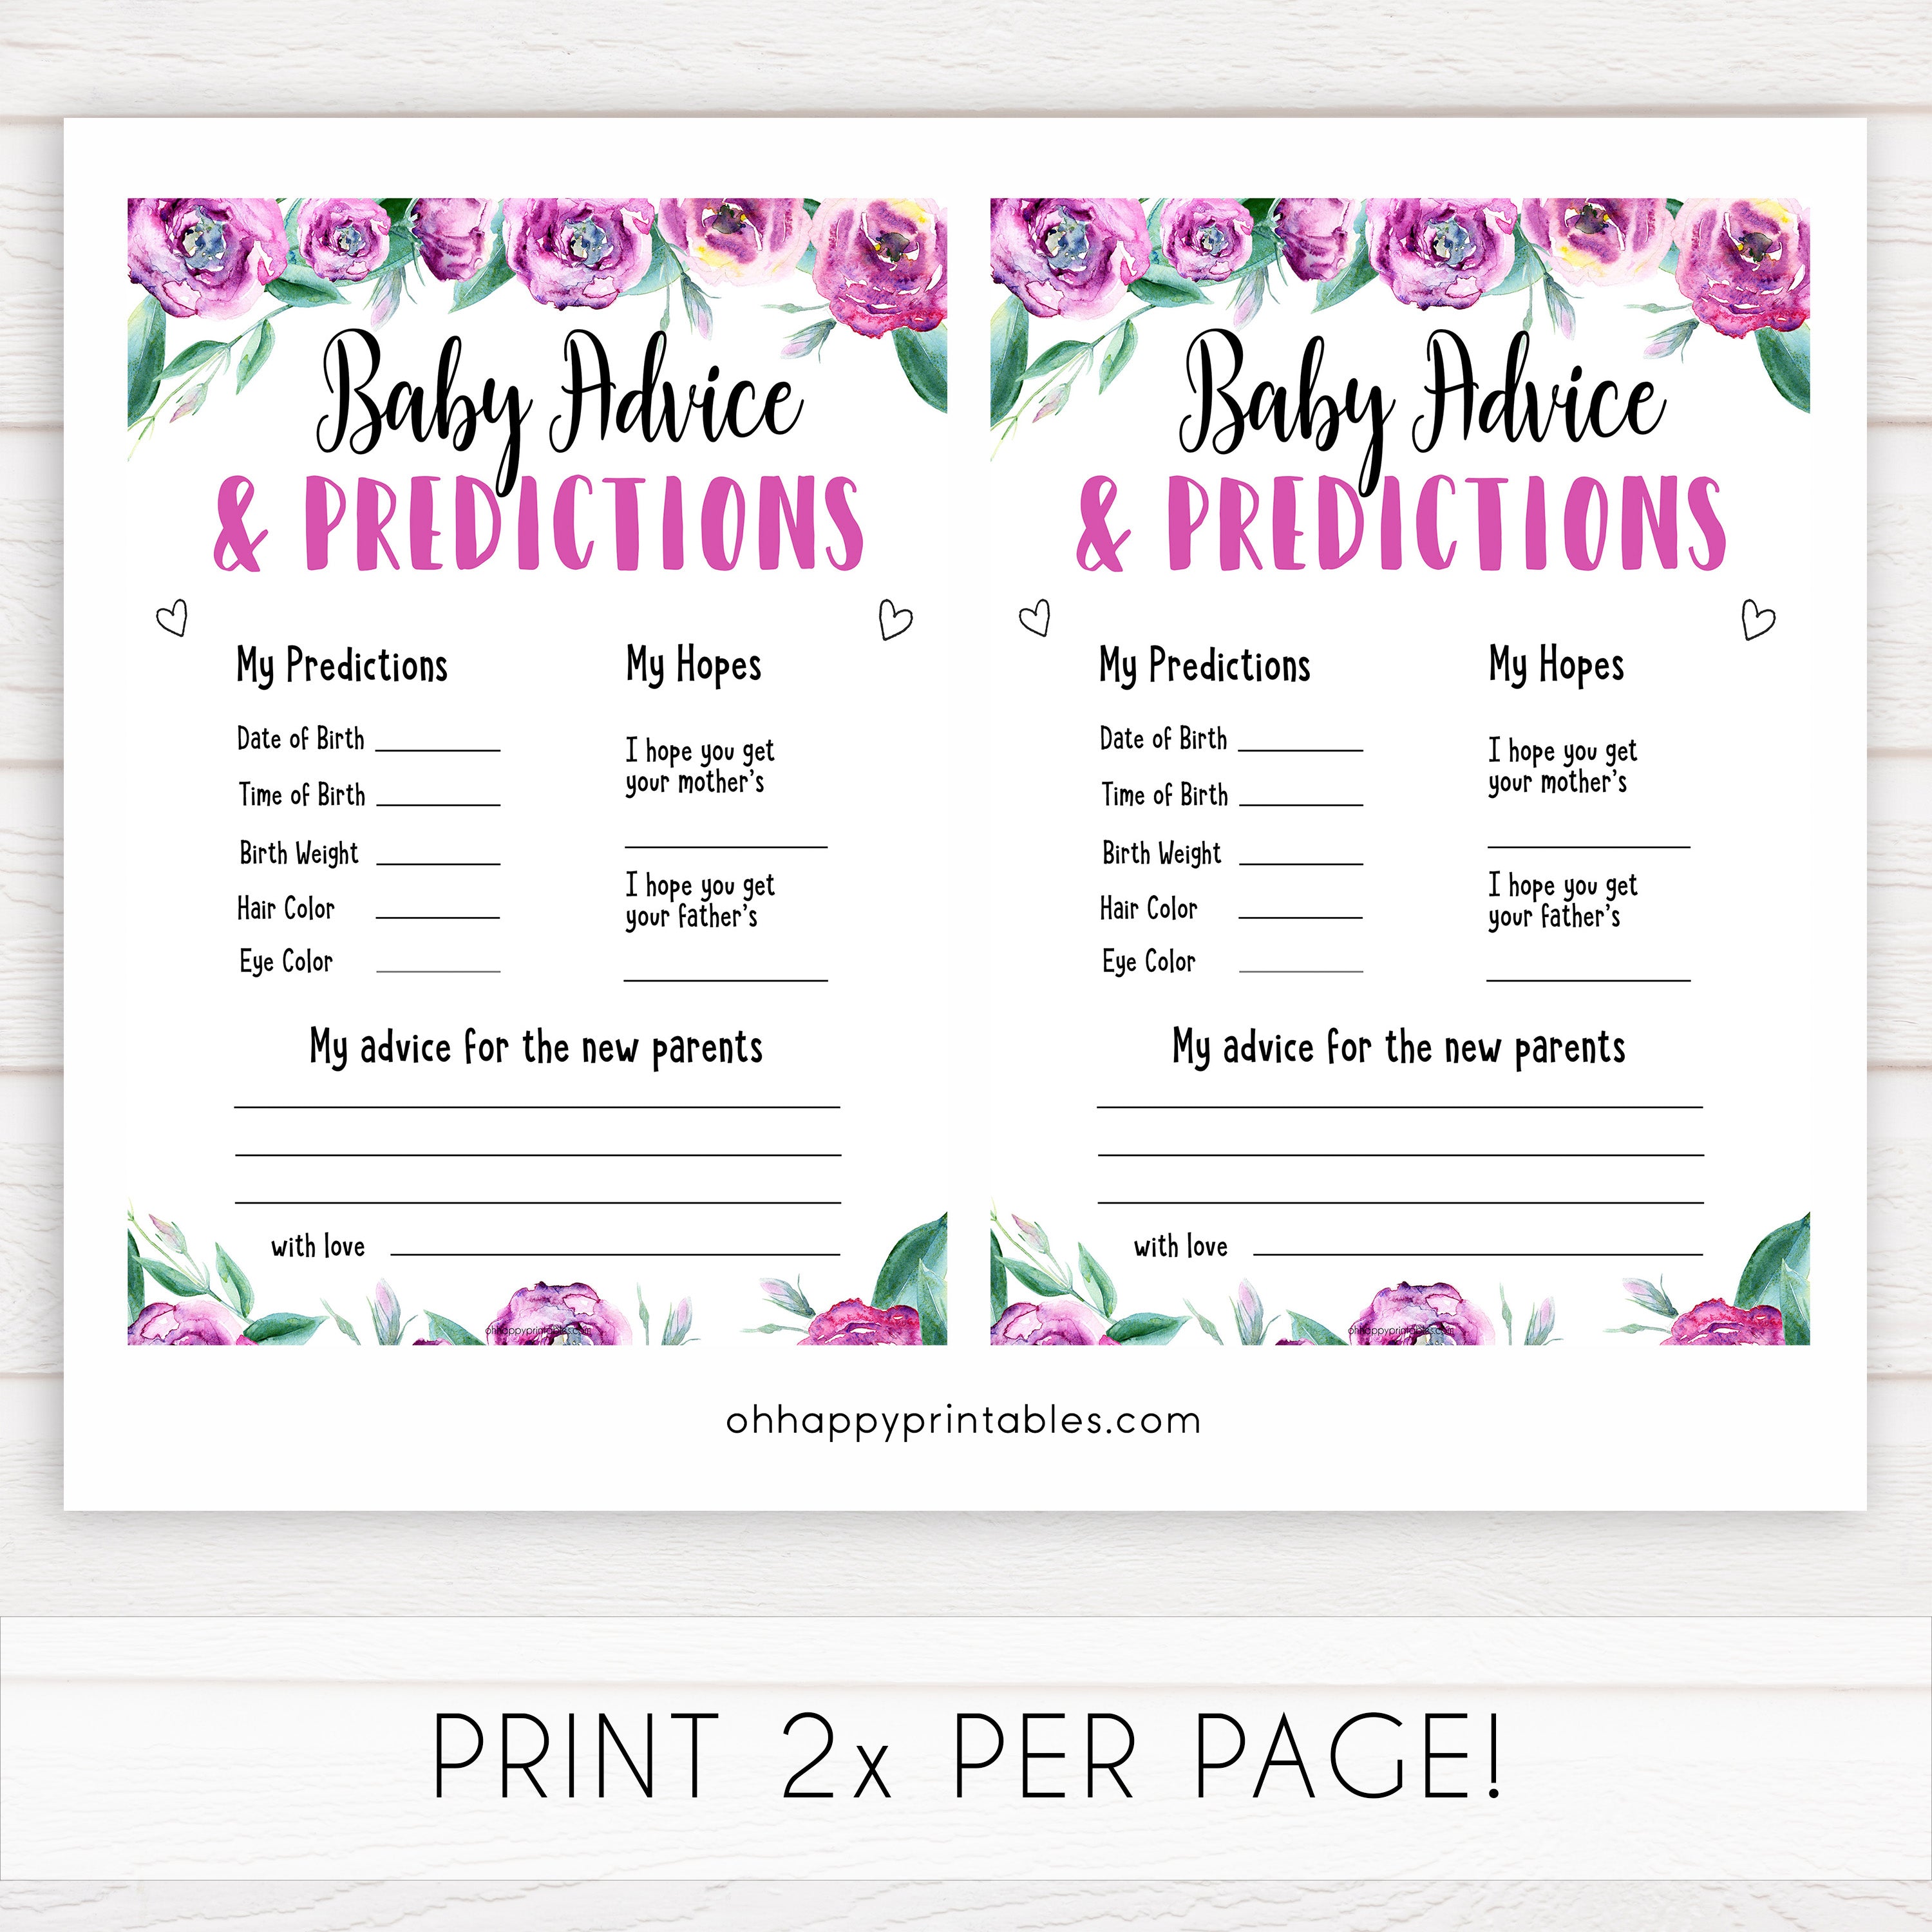 Purple peonies baby advice and predictions baby shower games, printable baby shower games, fun baby shower games, baby shower games, popular baby shower games, floral baby shower games, purple baby shower themes